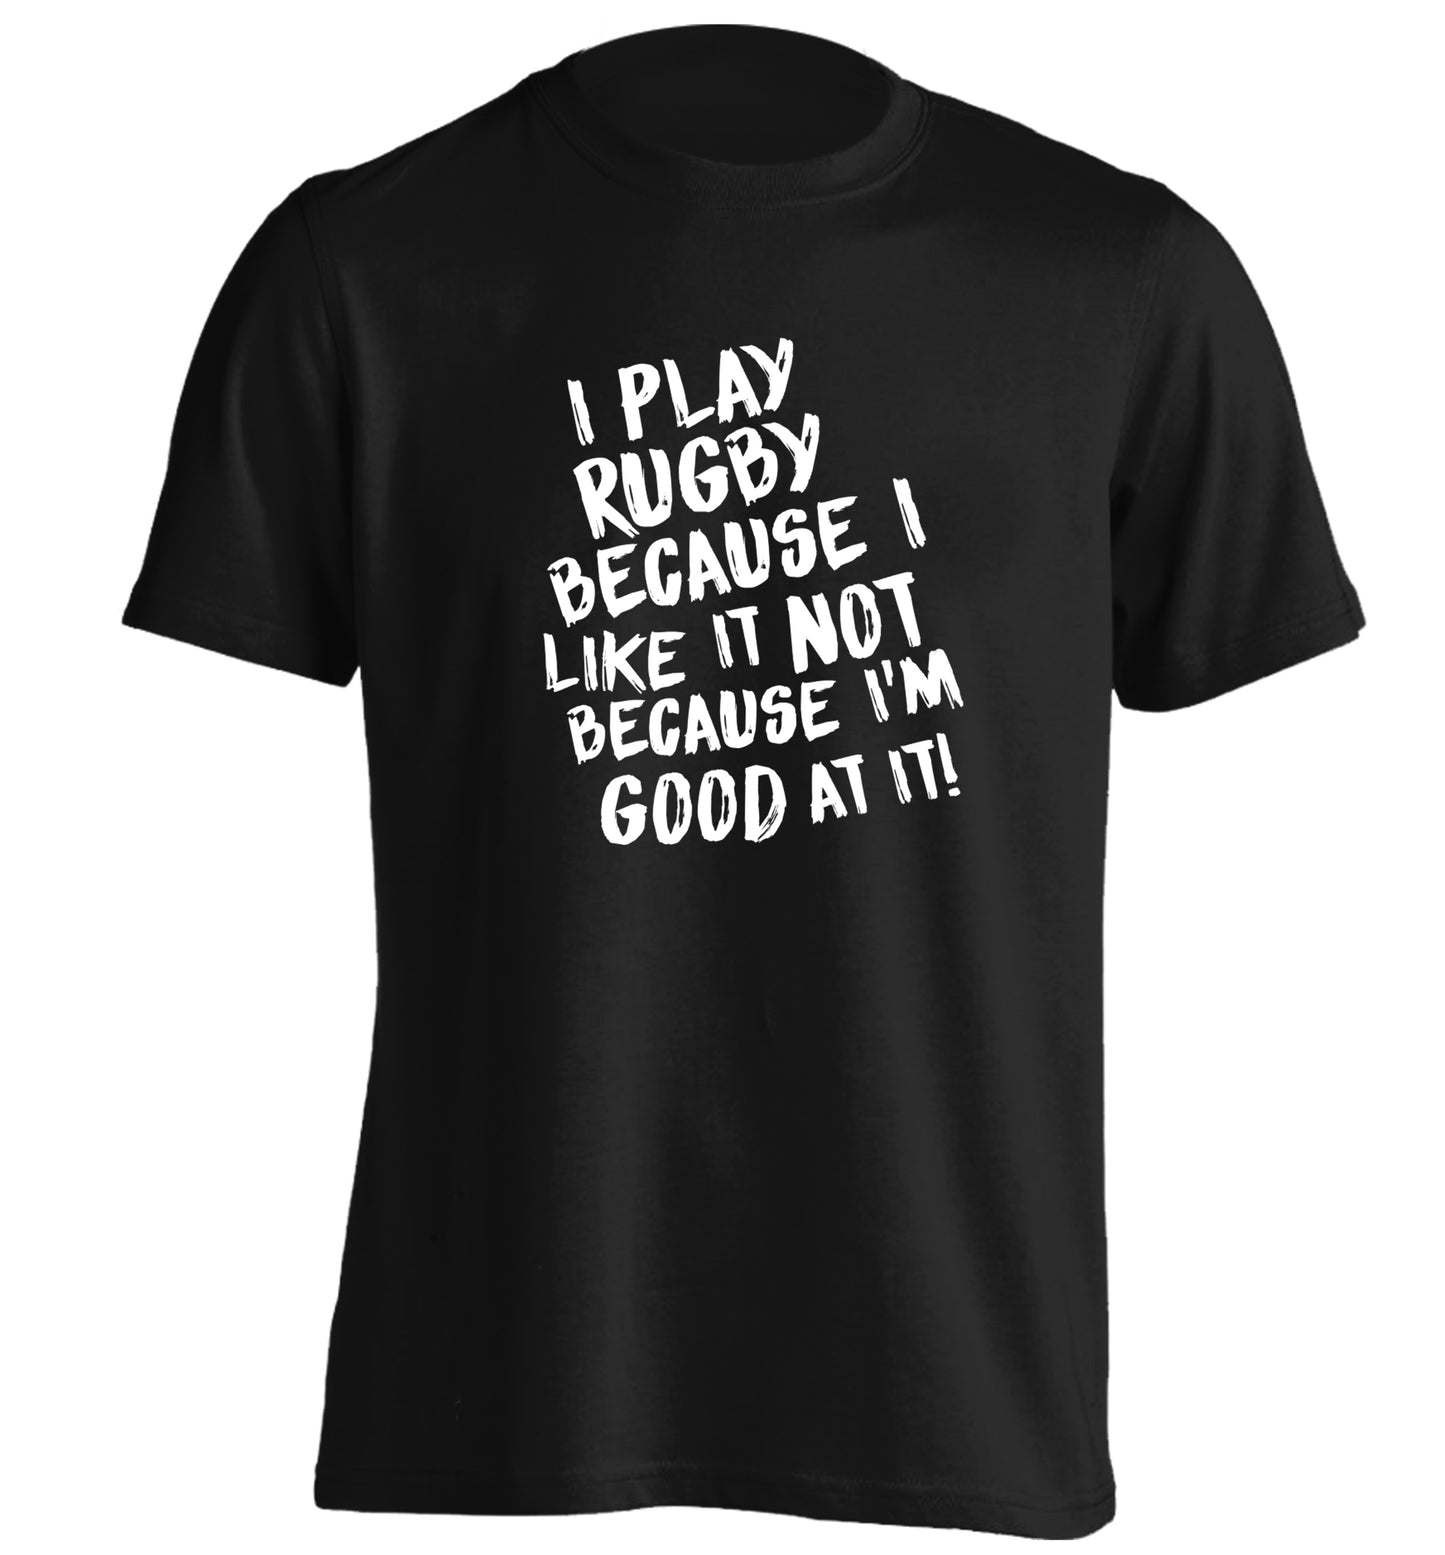 I play rugby because I like it not because I'm good at it adults unisex black Tshirt 2XL